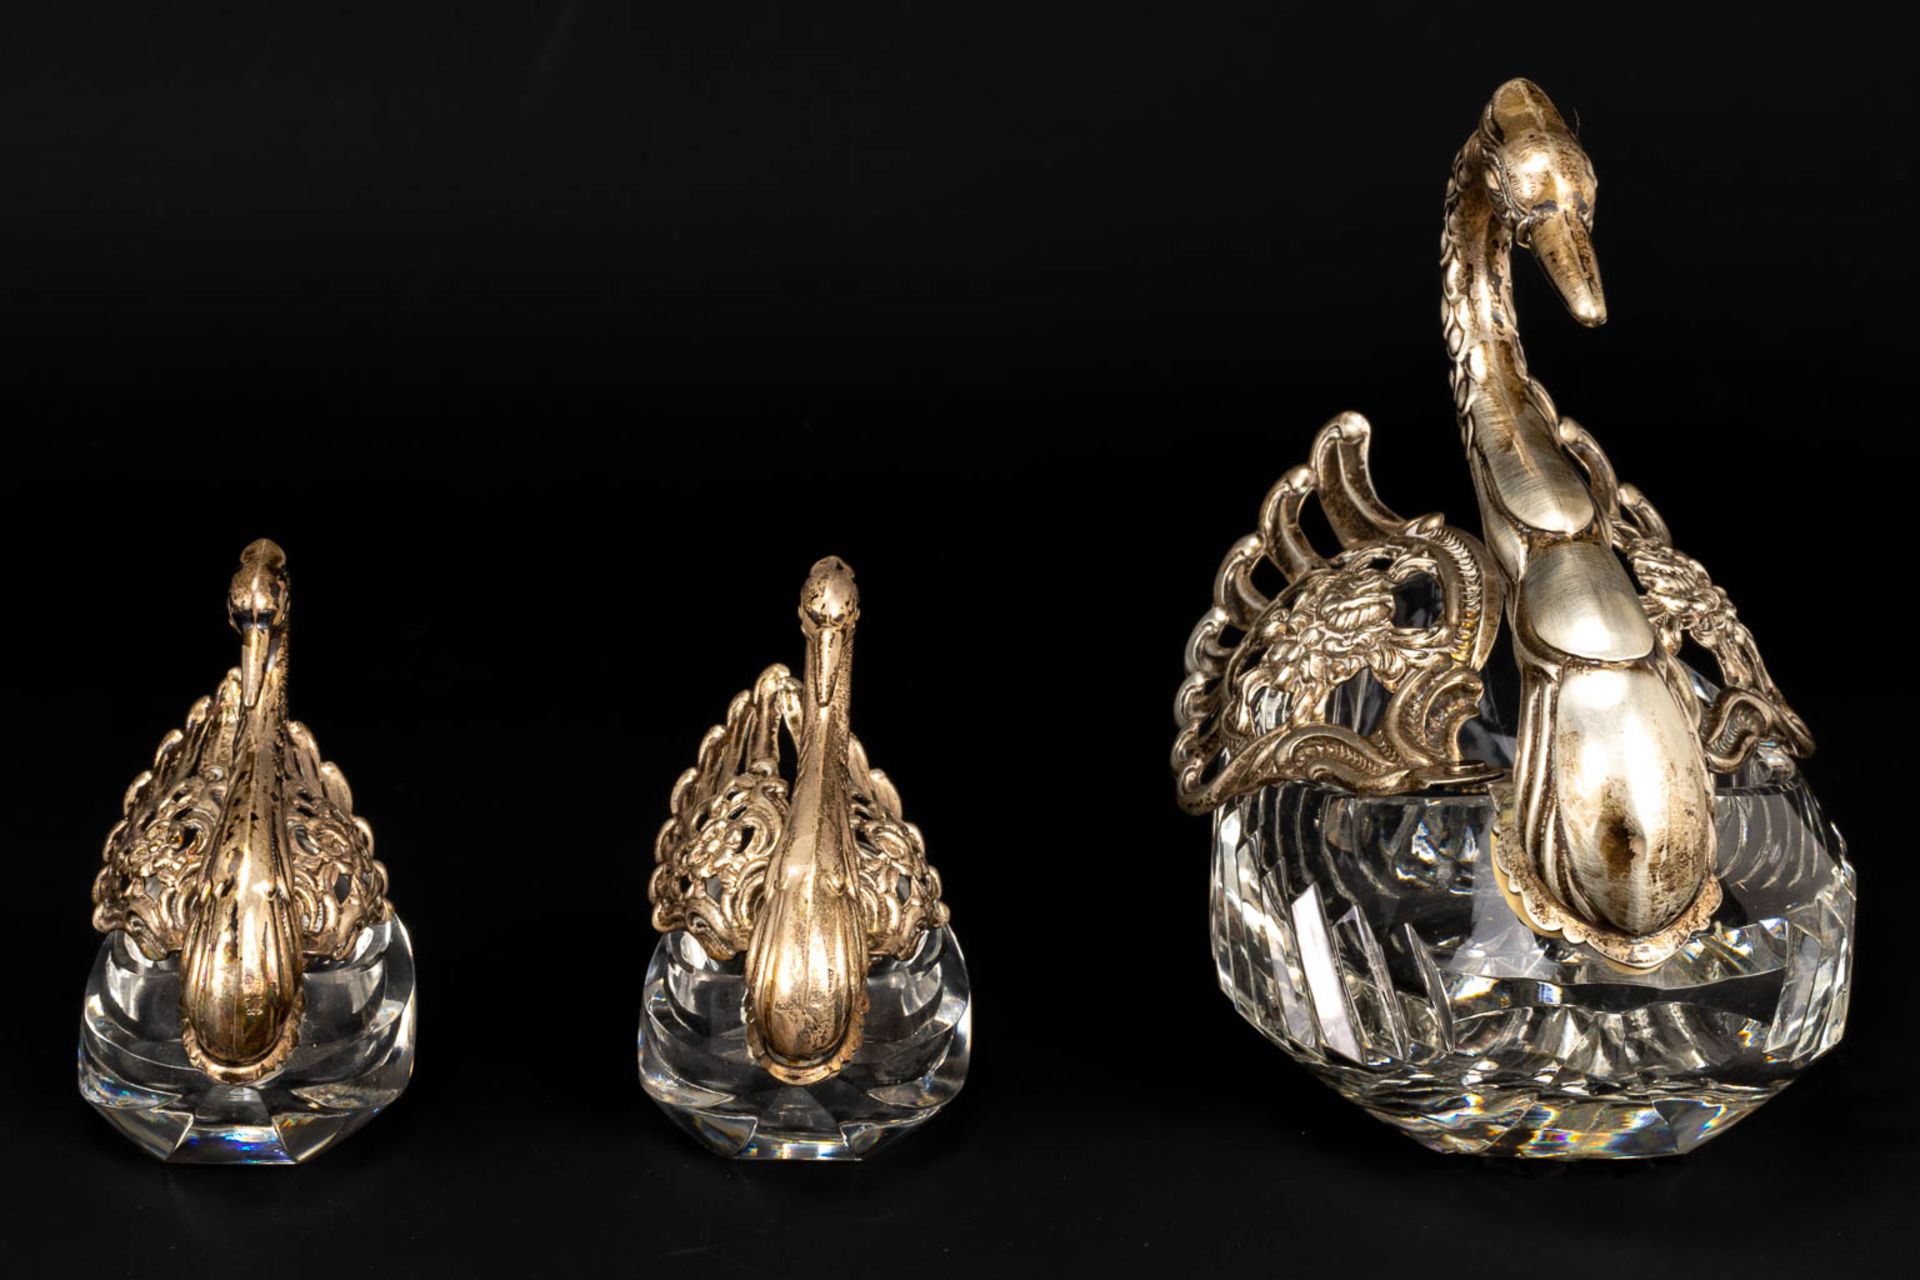 A collection of 3 sugar pots in the shape of a swan, made of crystal and solid silver. - Image 10 of 13